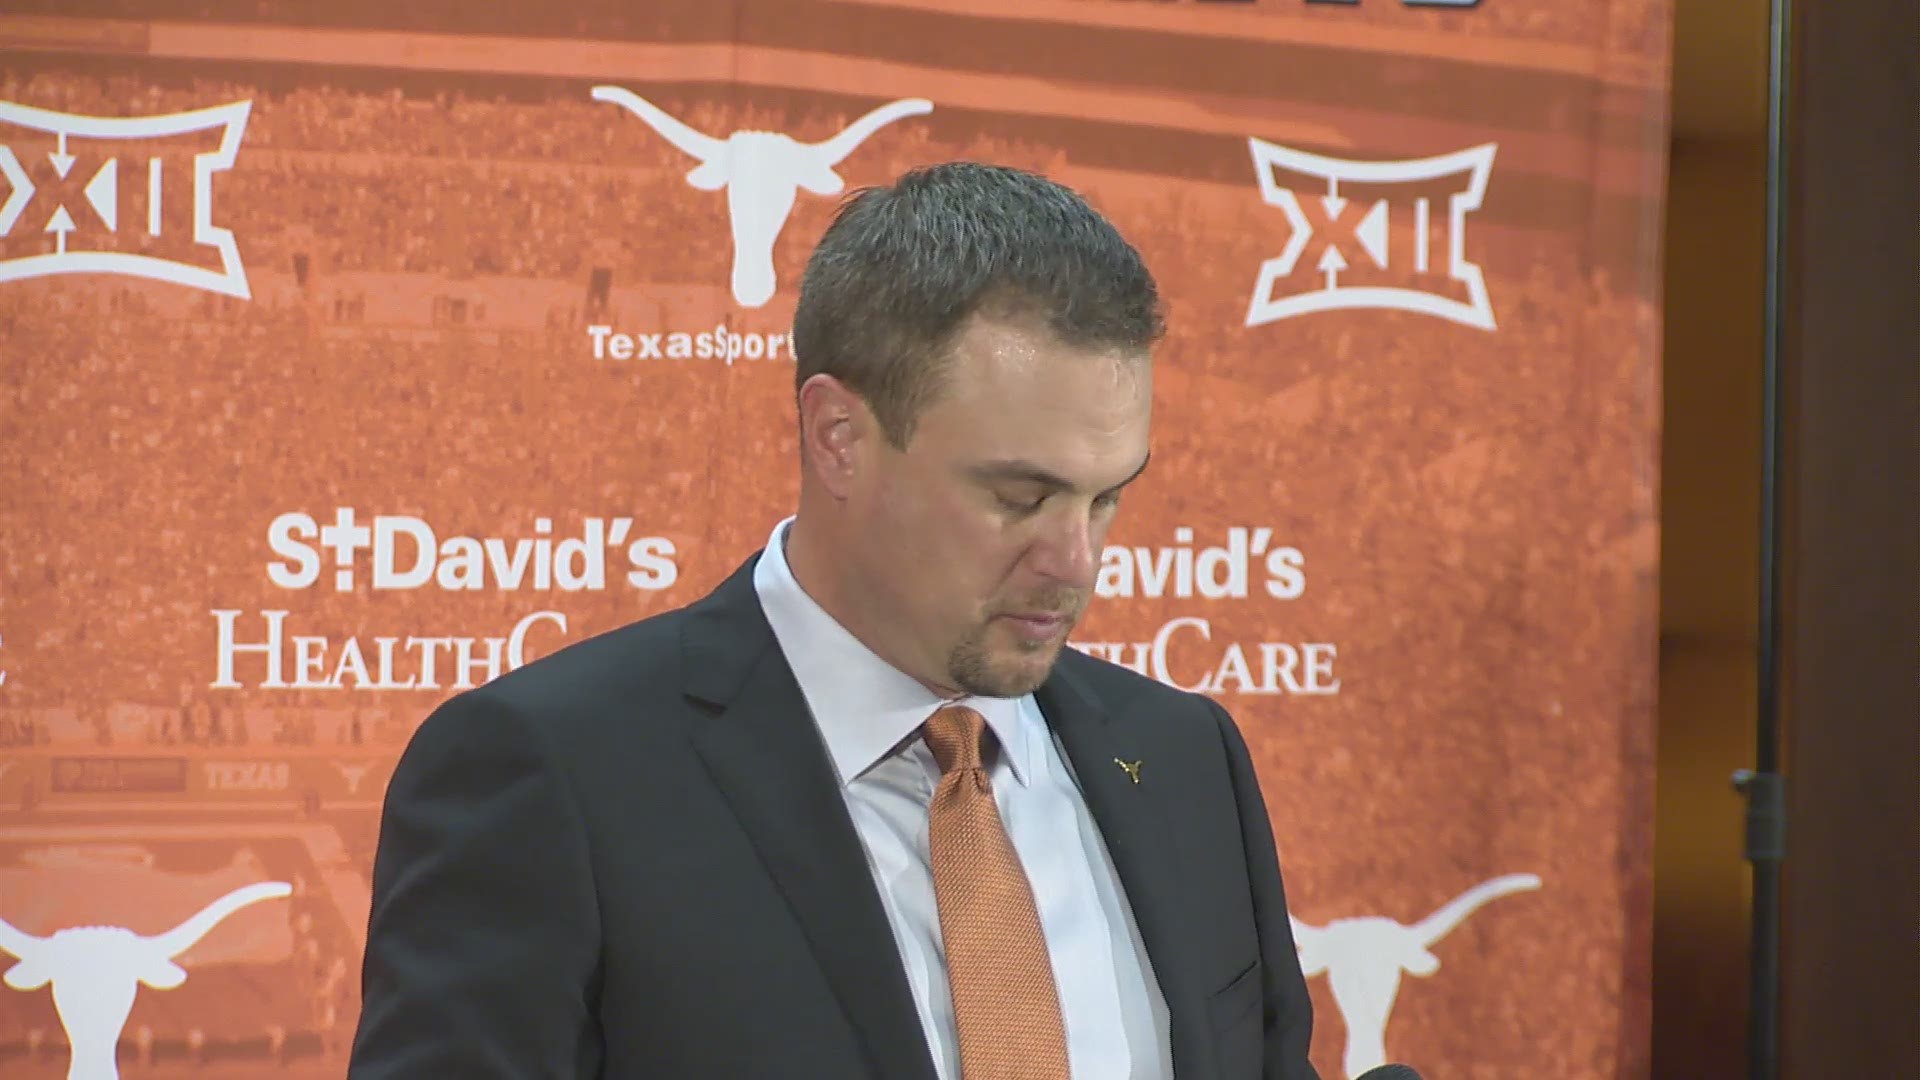 The new Longhorns football coach, Tom Herman, was introduced on the UT campus on Sunday.